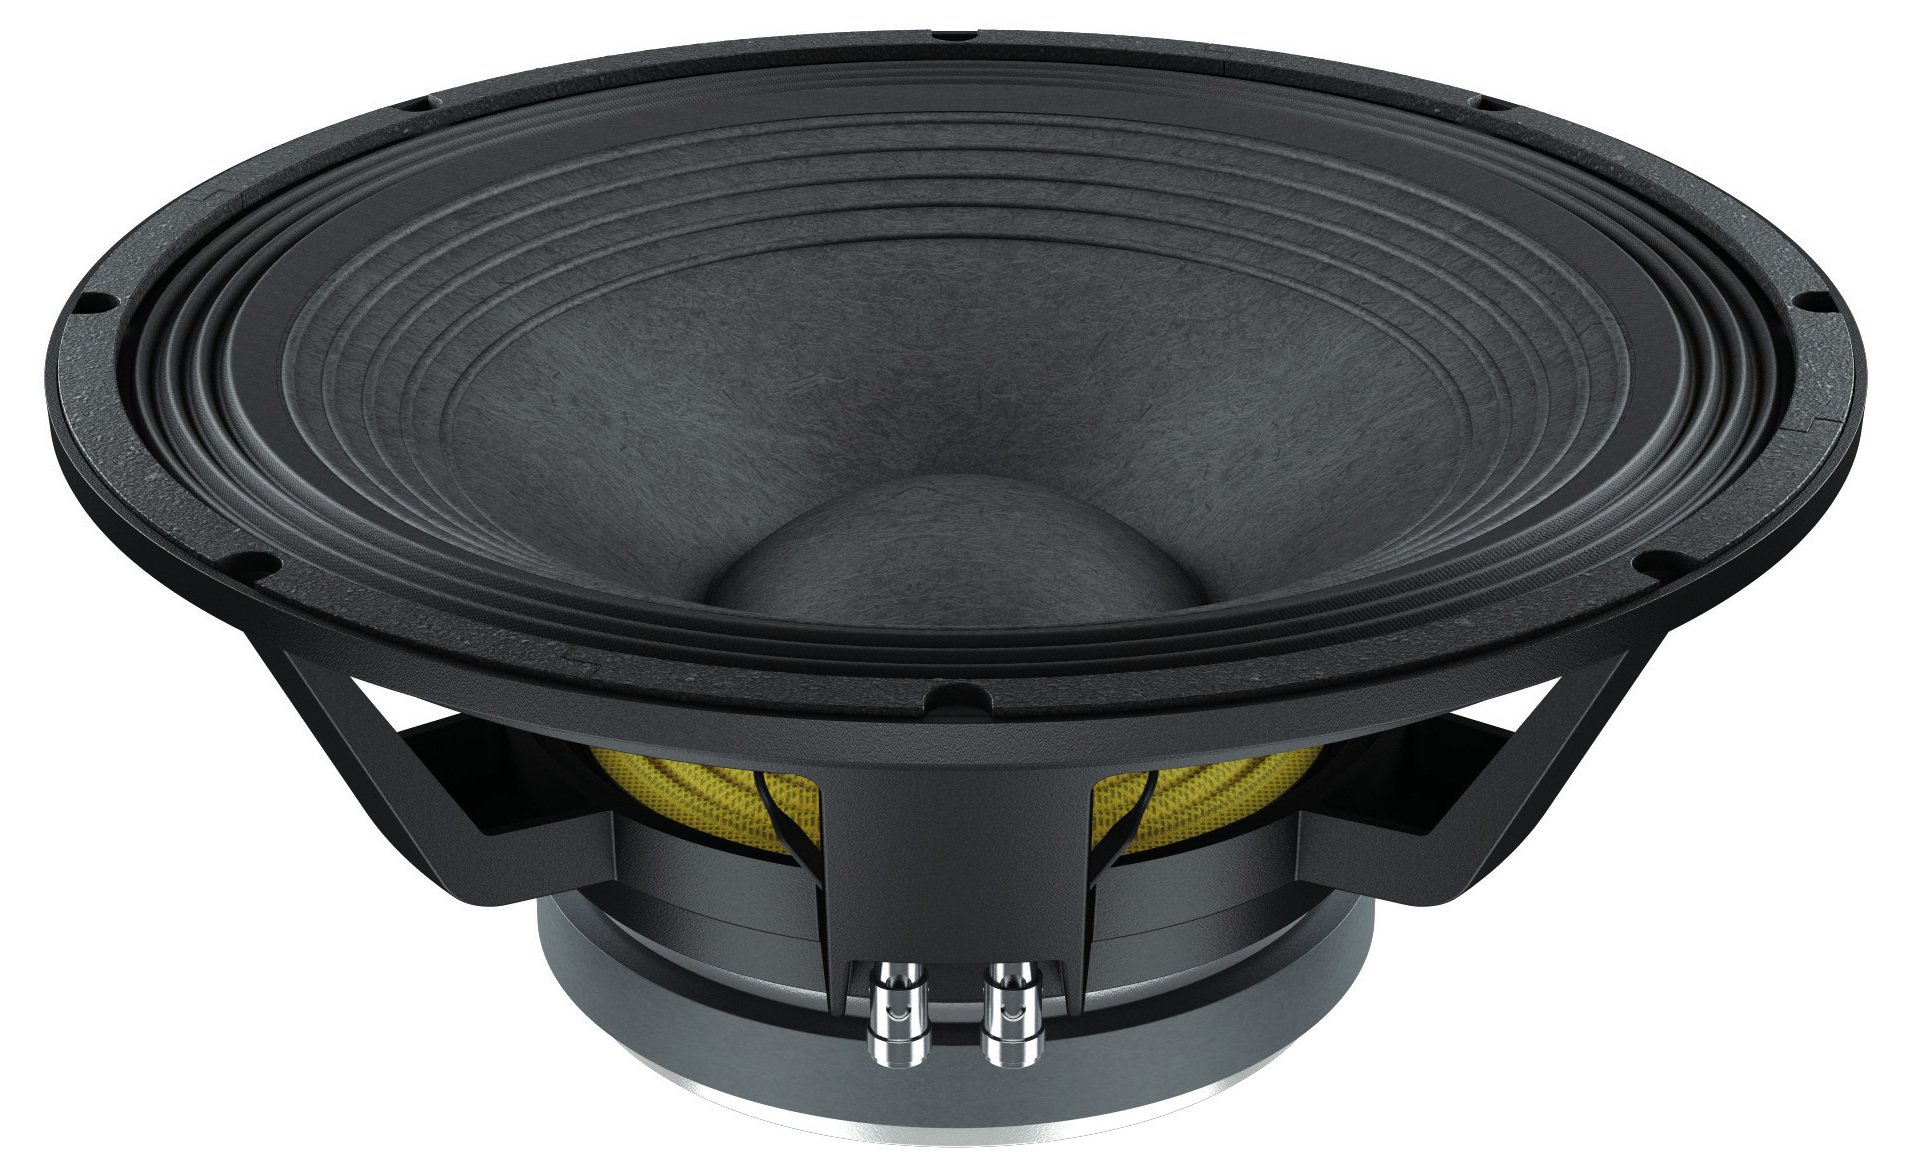 LaVoce WXF15.400 Woofer